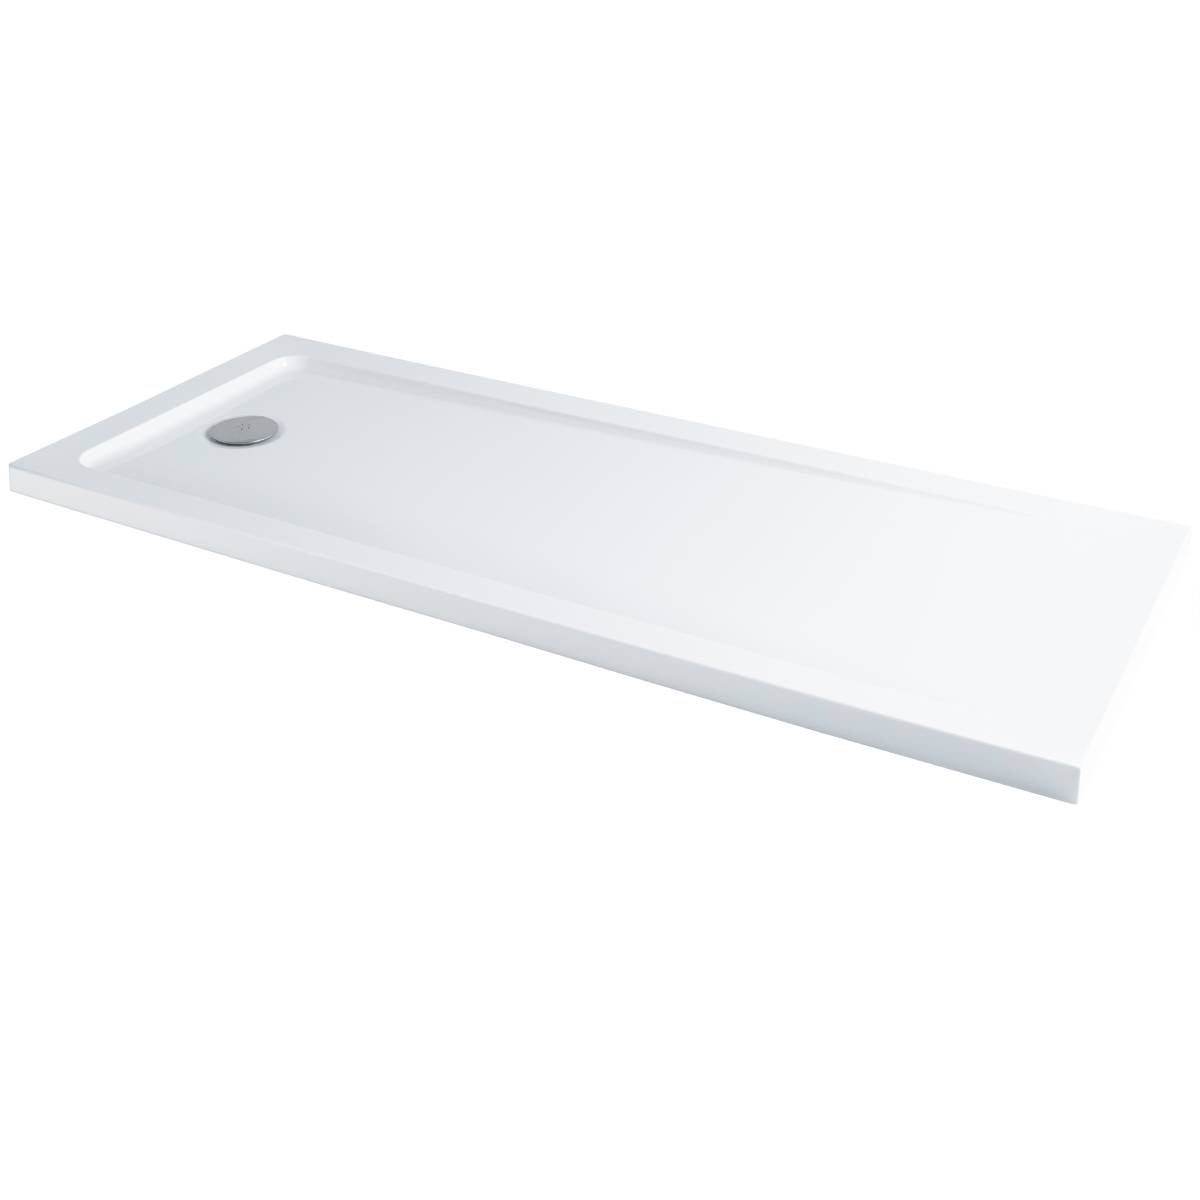 Eliseo Ricci 1700 x 700mm Bath Replacement Shower Tray (1640)